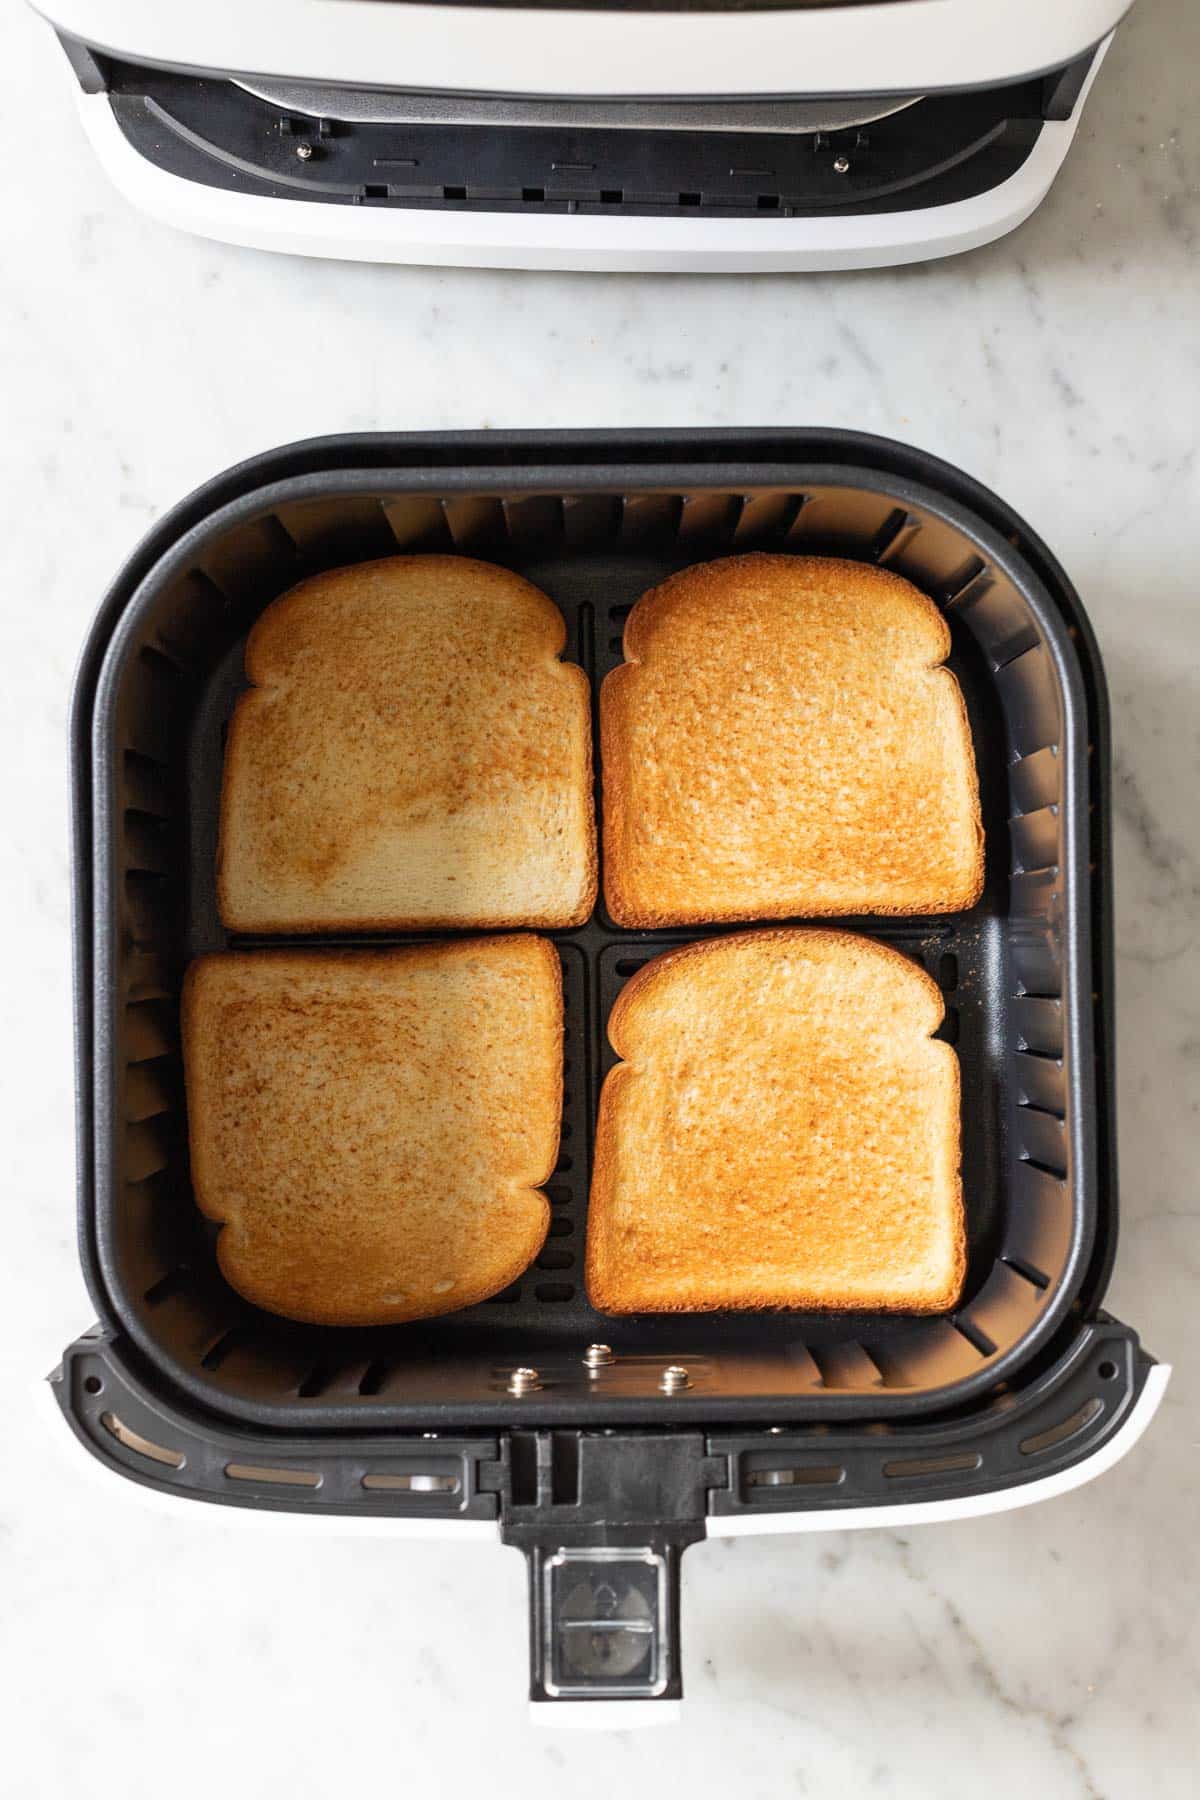 How Do You Make Toast In An Air Fryer